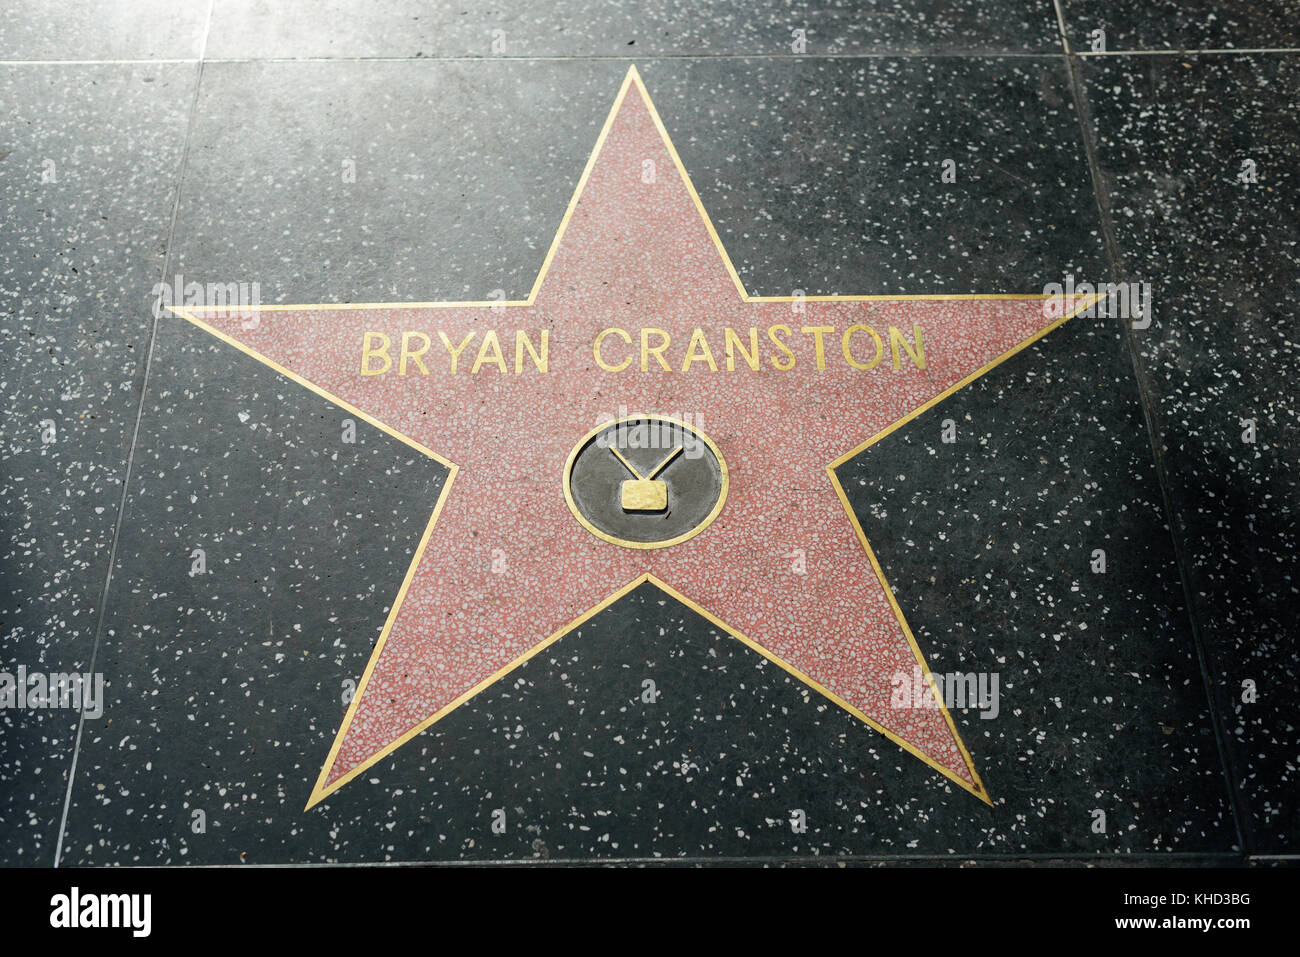 HOLLYWOOD, CA - DECEMBER 06: Bryan Cranston star on the Hollywood Walk of Fame in Hollywood, California on Dec. 6, 2016. Stock Photo